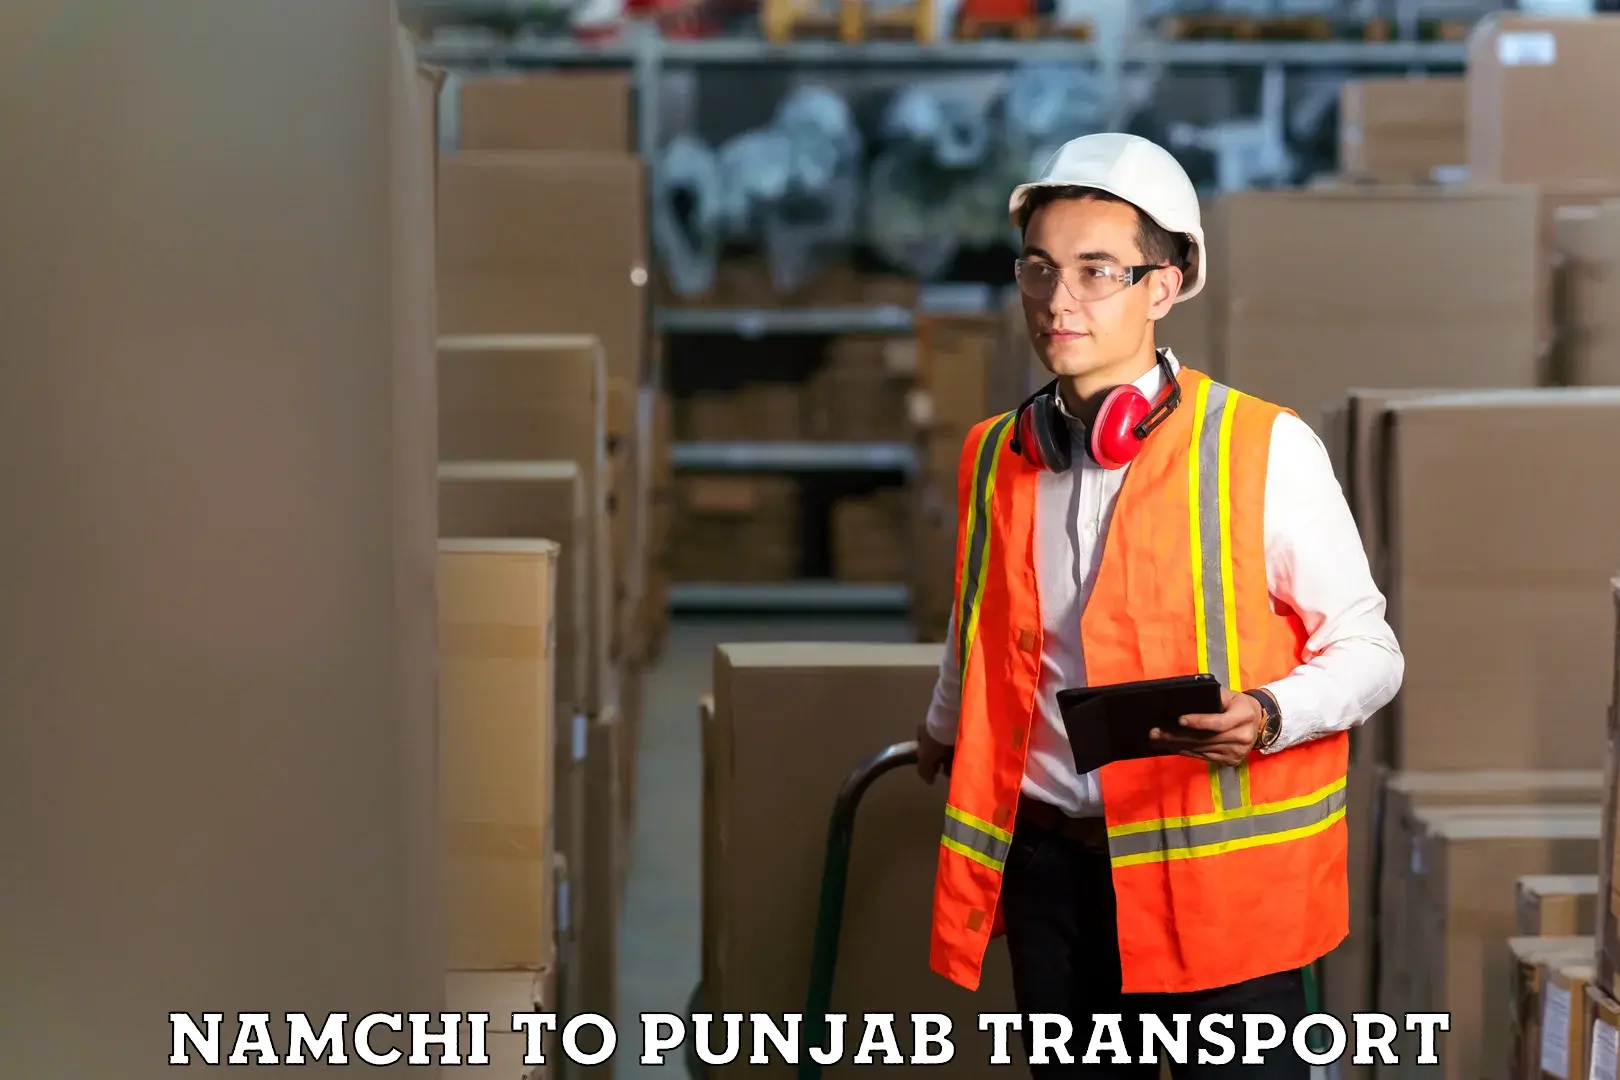 Container transport service Namchi to Ludhiana